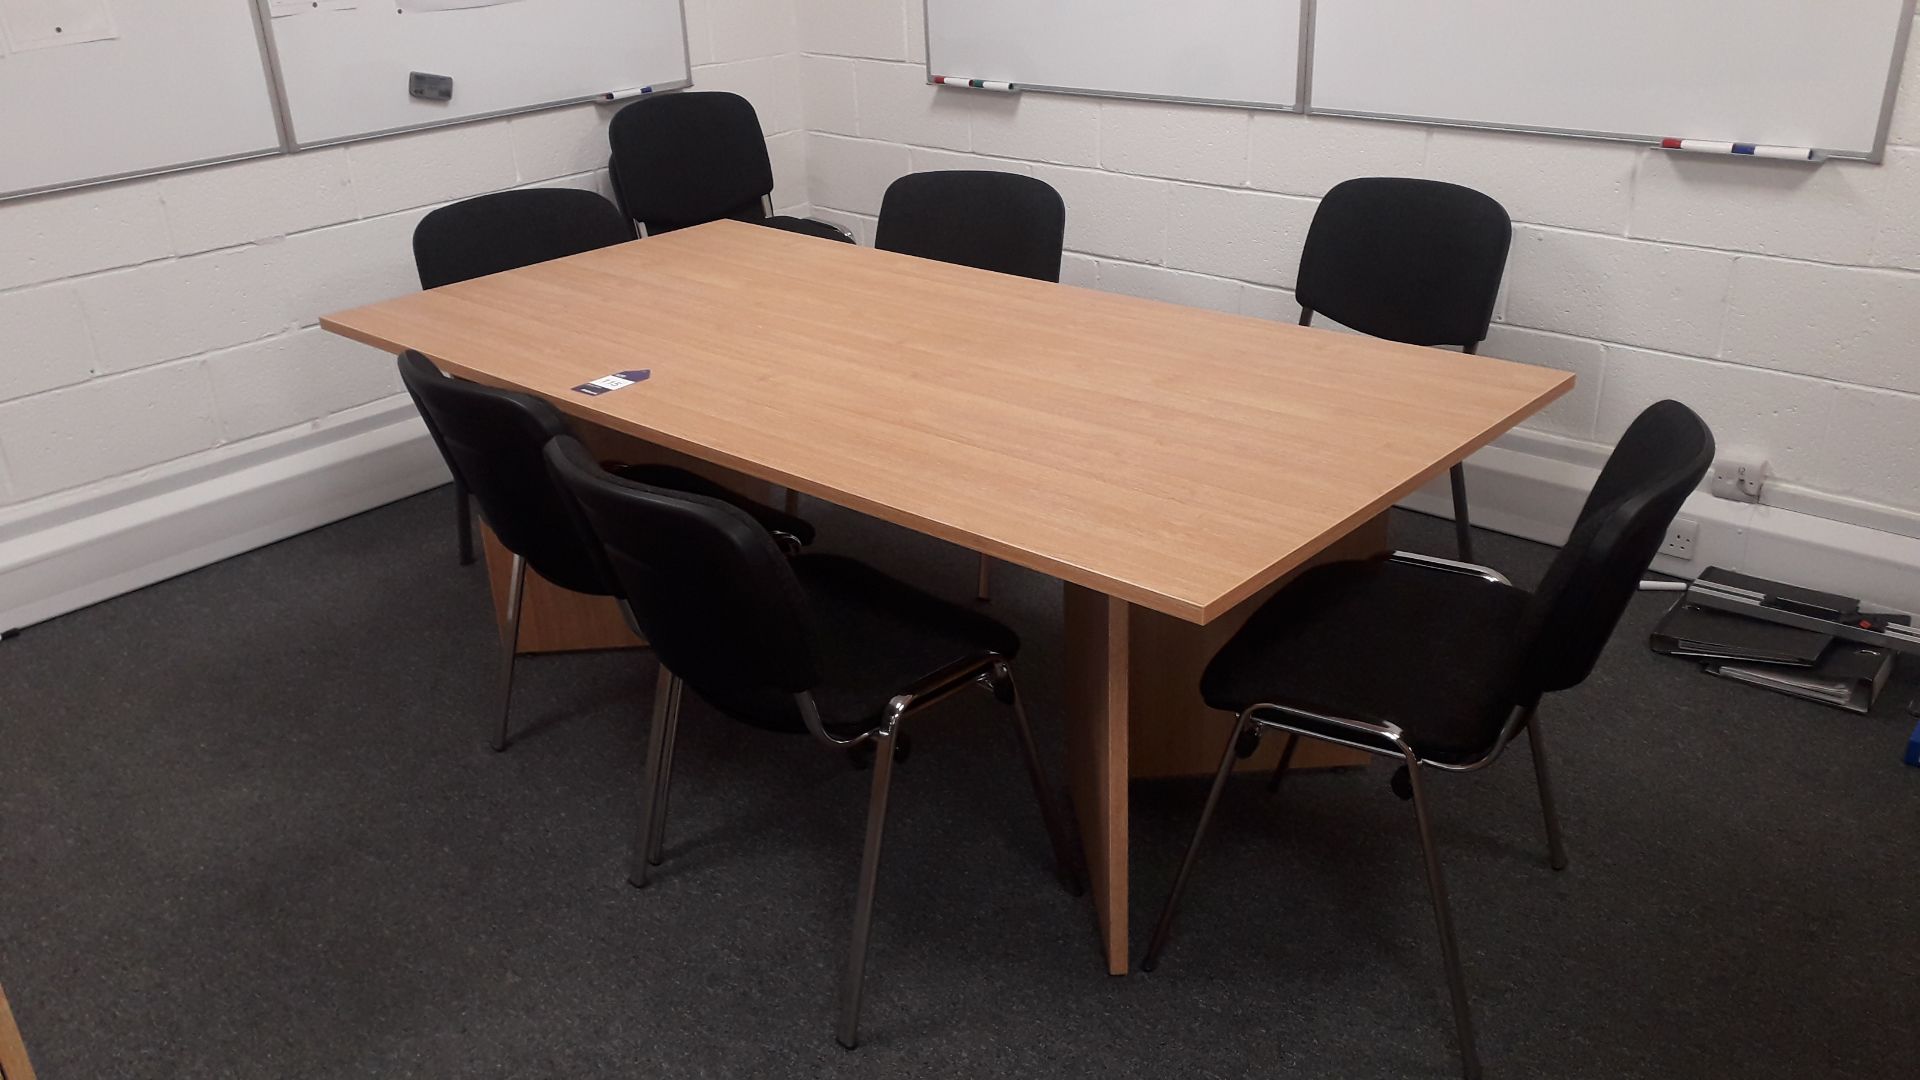 Meeting Table with 8 Chairs – (Located on First Floor)